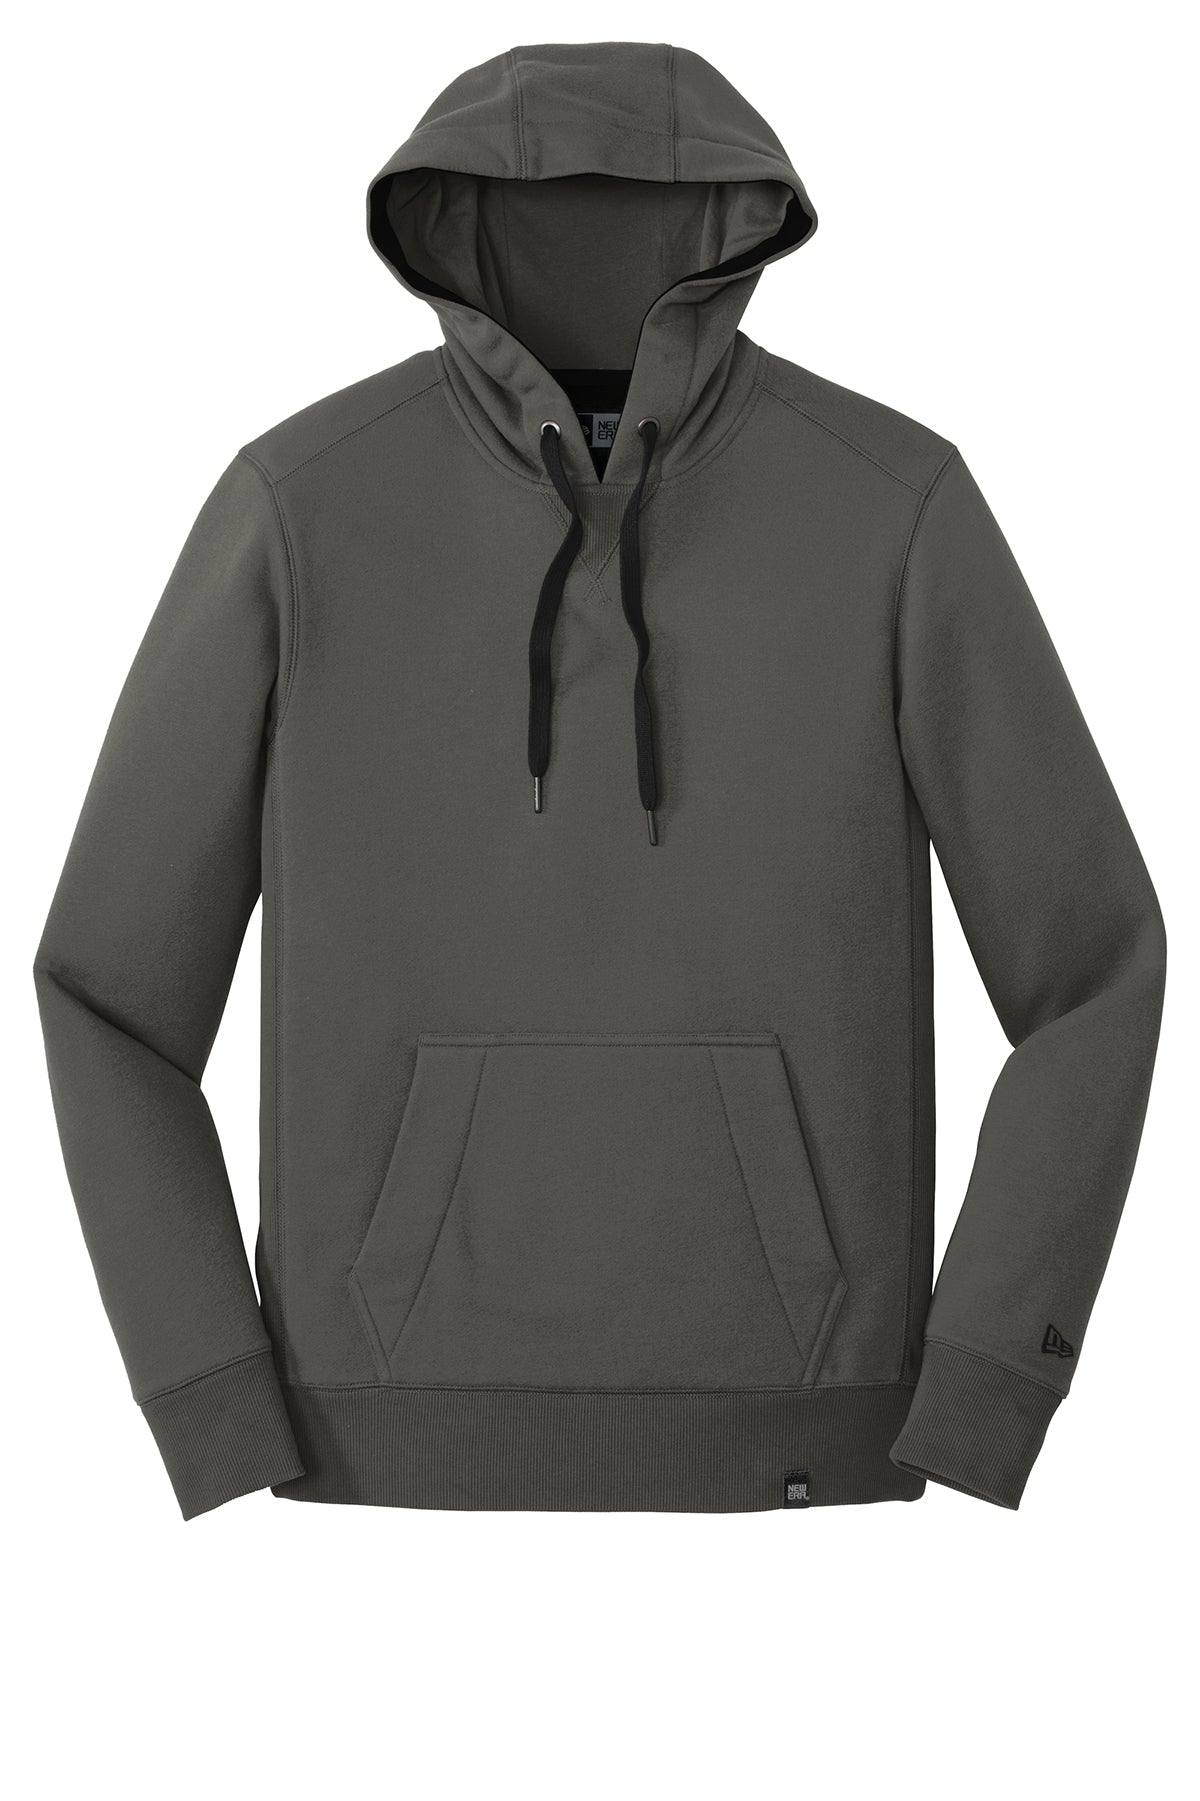 New Era® - French Terry Pullover Hoodie - NEA500